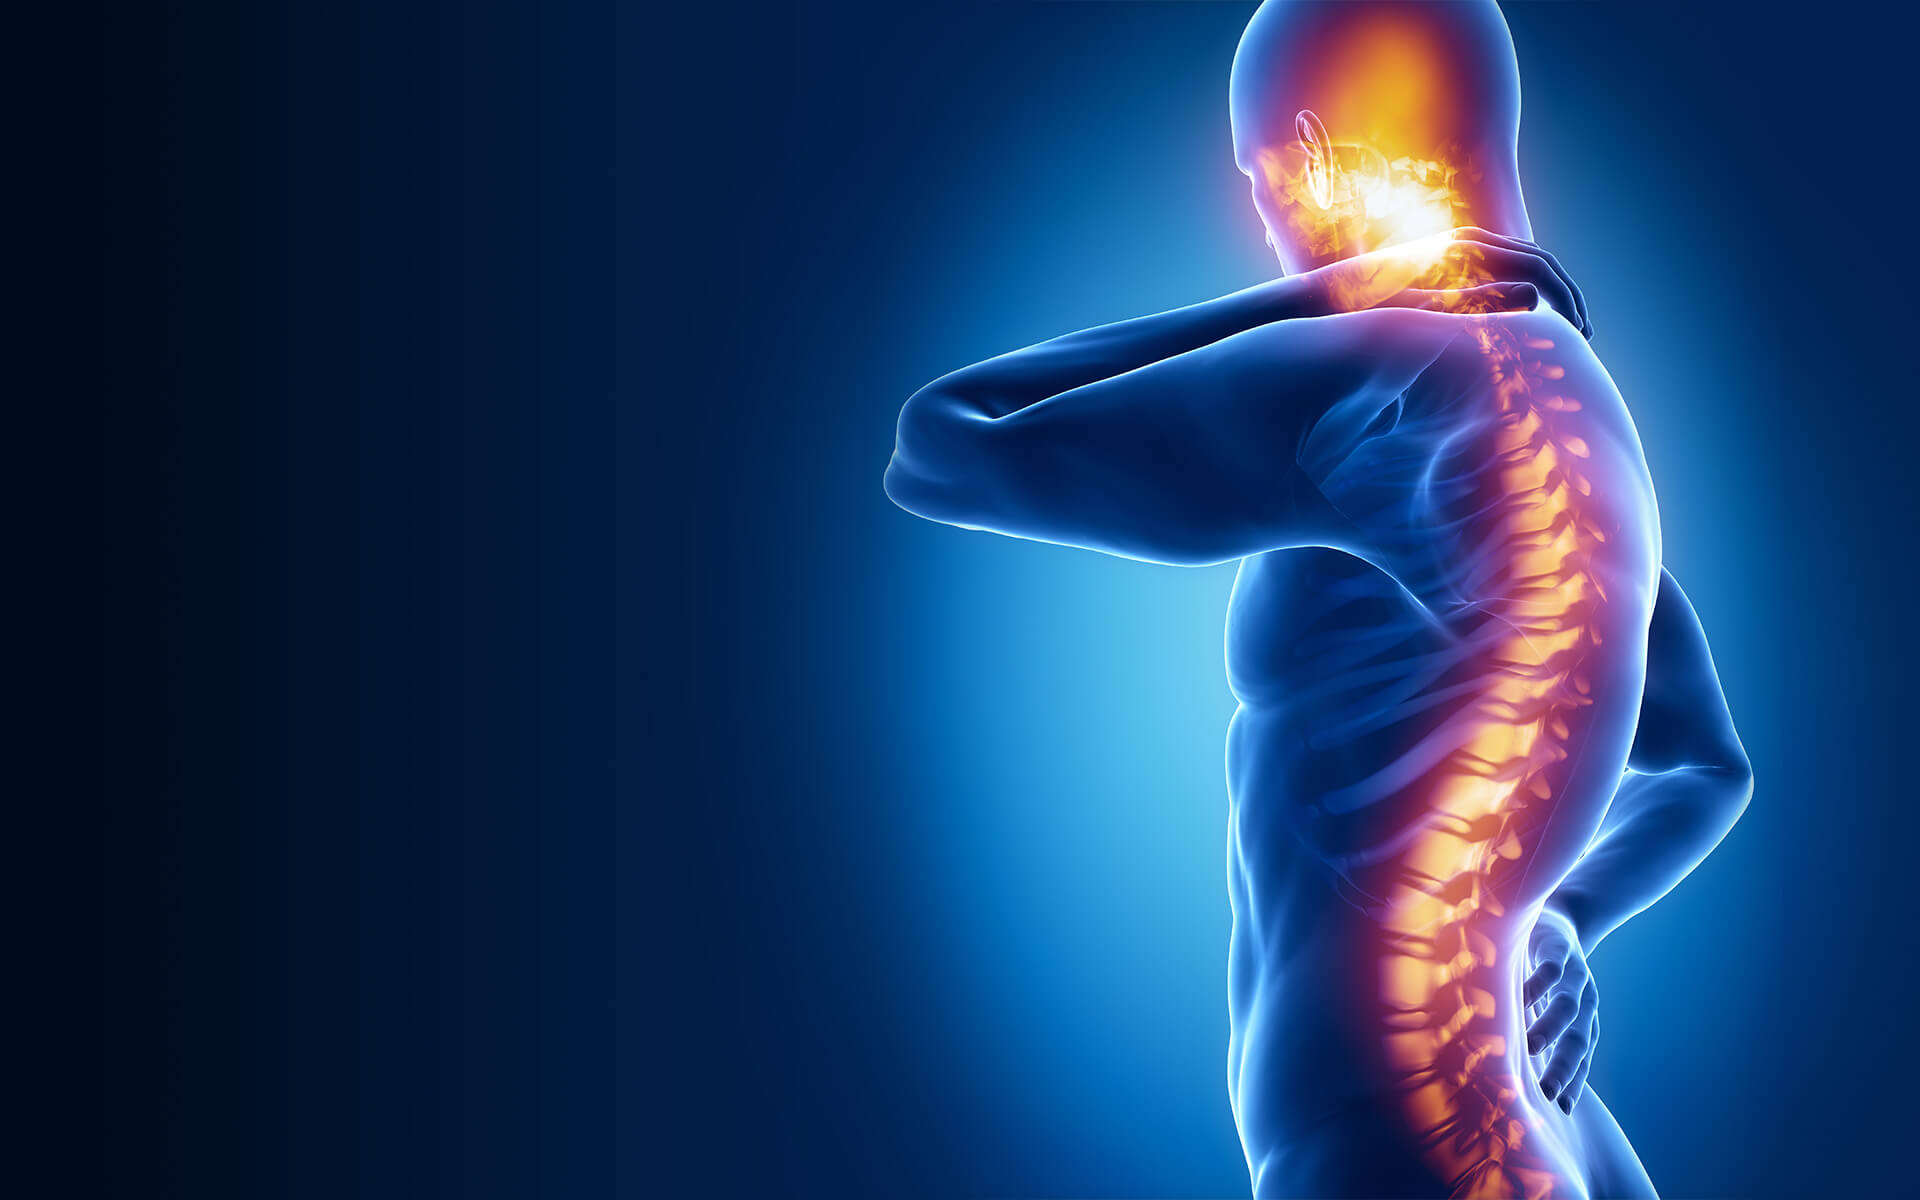 Spinal Cord Injury Overview: Symptoms, Diagnosis, & Treatments | IFAR